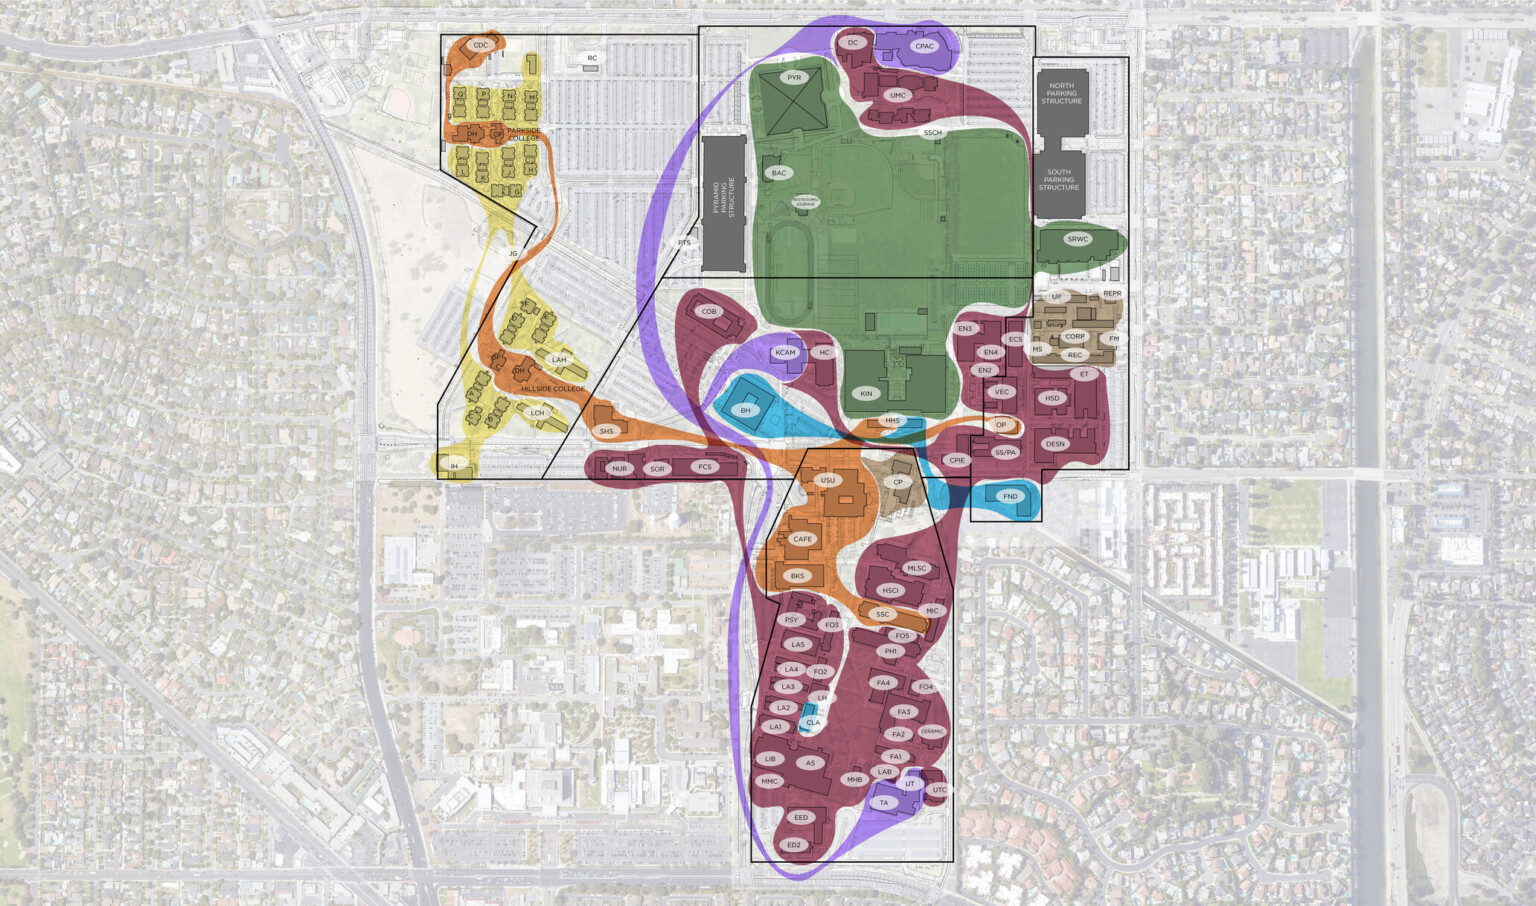 Gray low fidelity aerial map with a rectilinear campus section highlighted in green, purple, yellow, orange, maroon, and blue